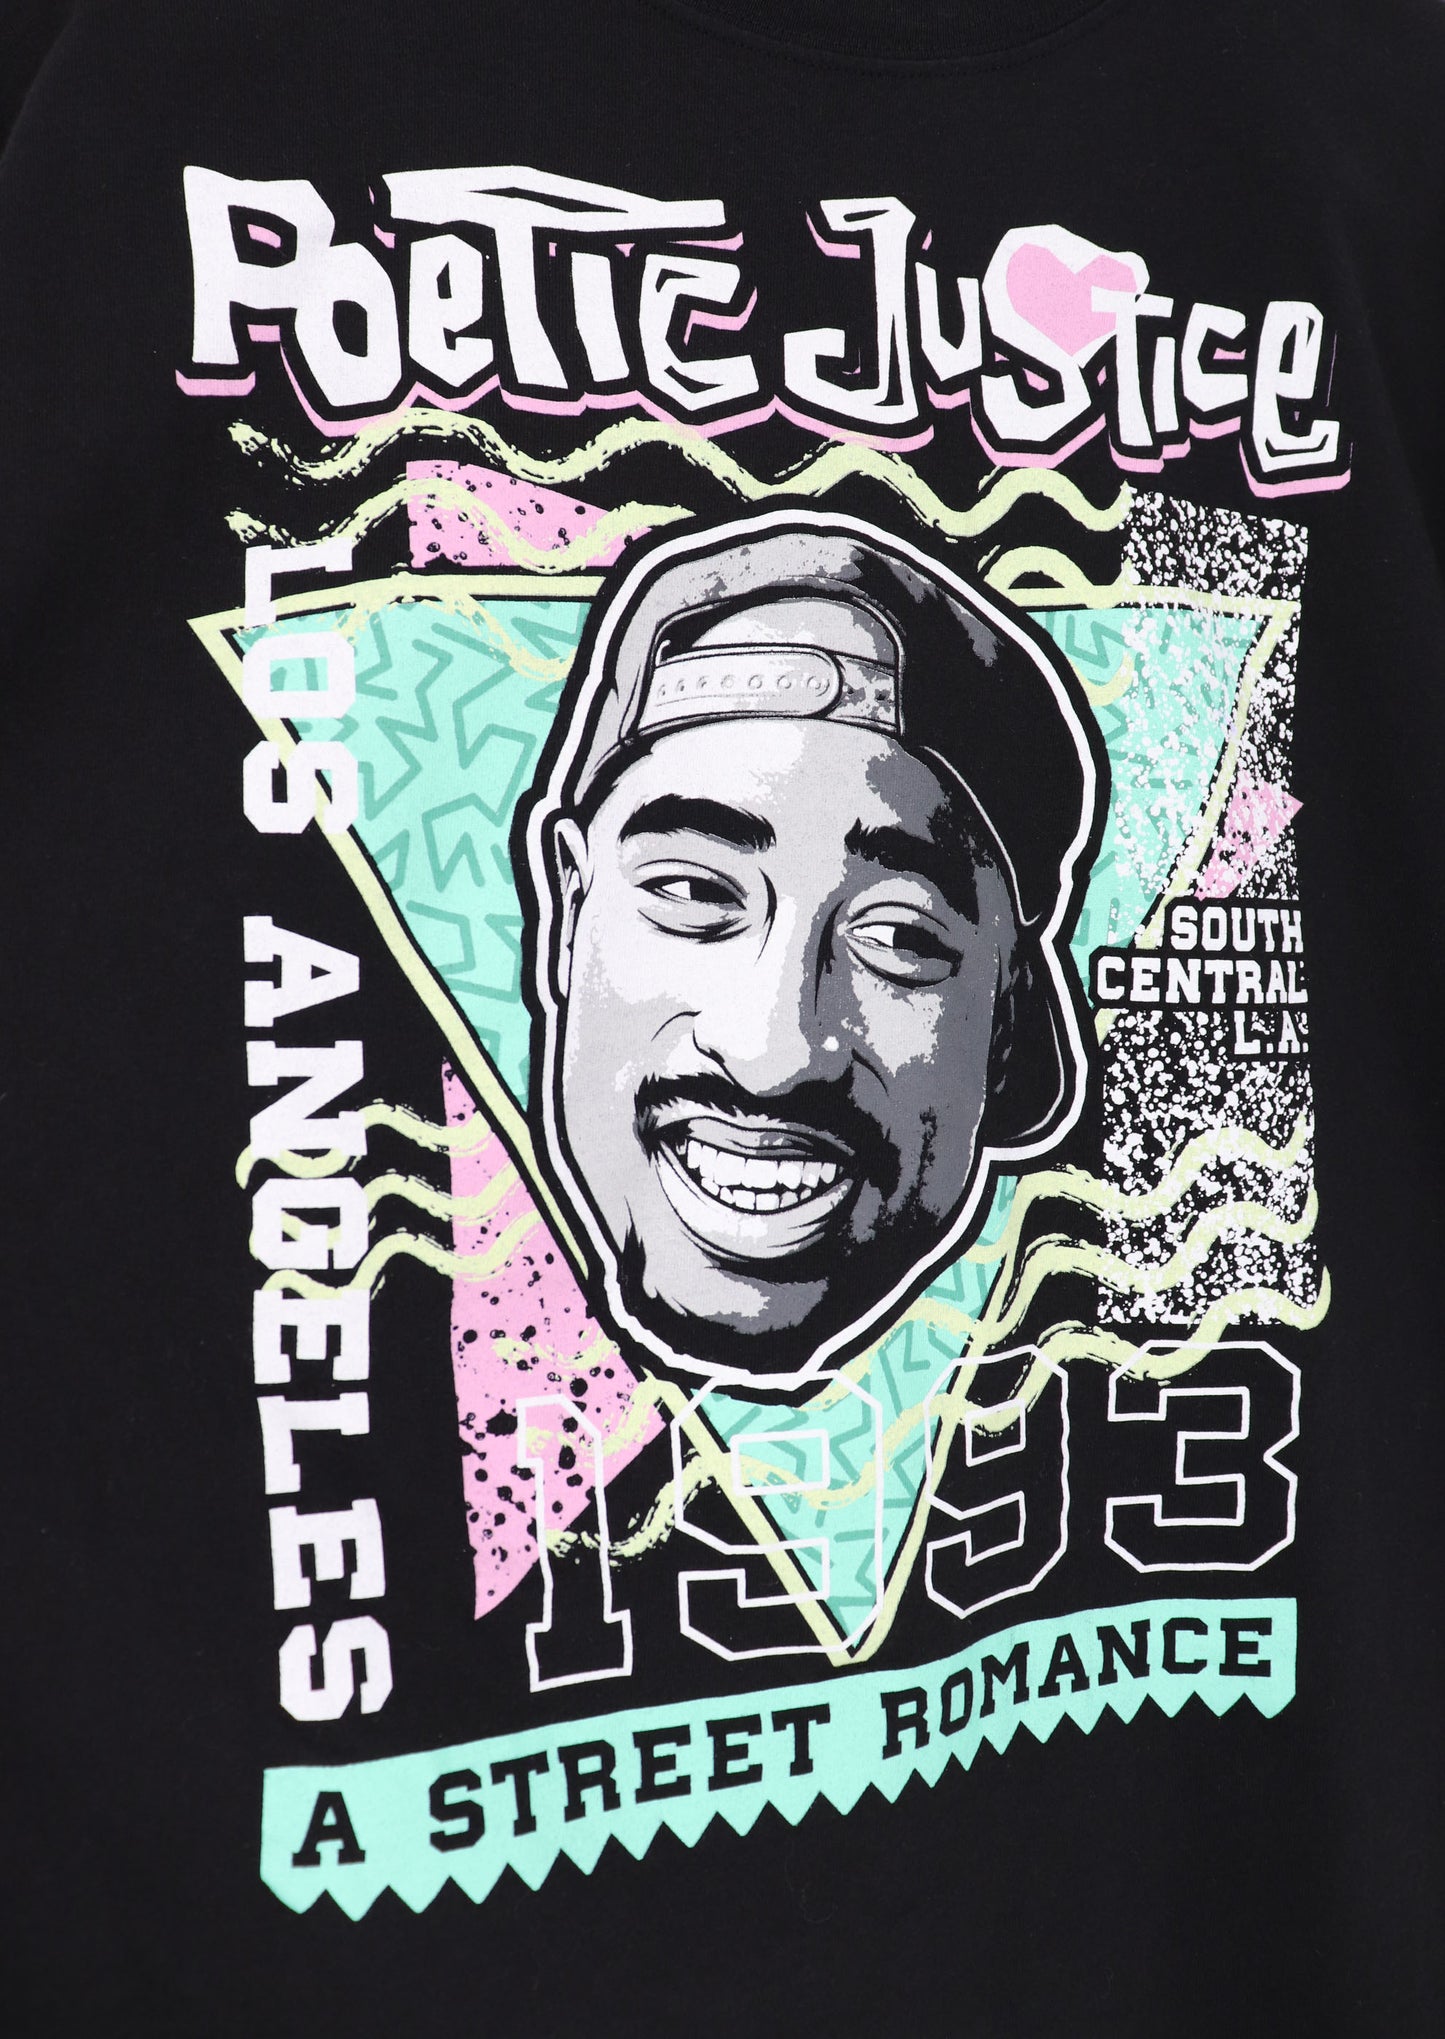 2PAC POETIC JUSTICE A STREET ROMANCE 1993